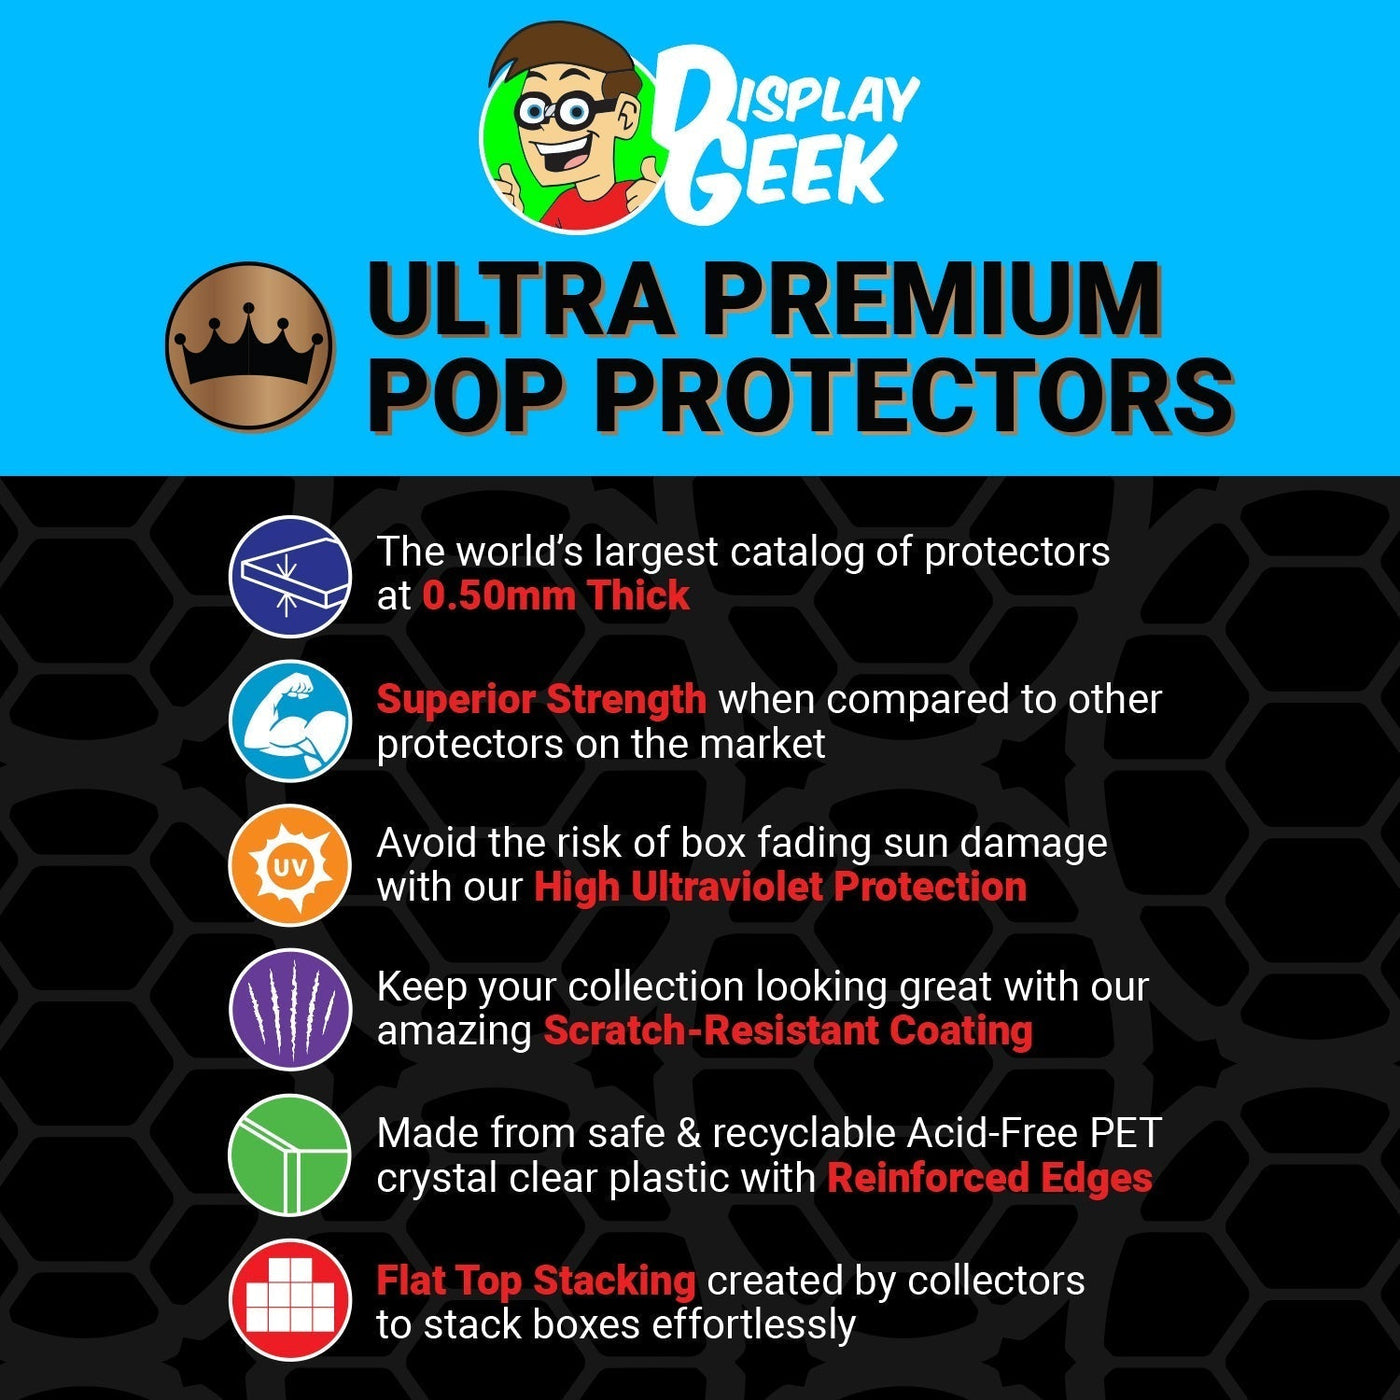 Pop Protector for 2 Pack Baby Nifflers Brown & Tan Funko Pop on The Protector Guide App by Display Geek